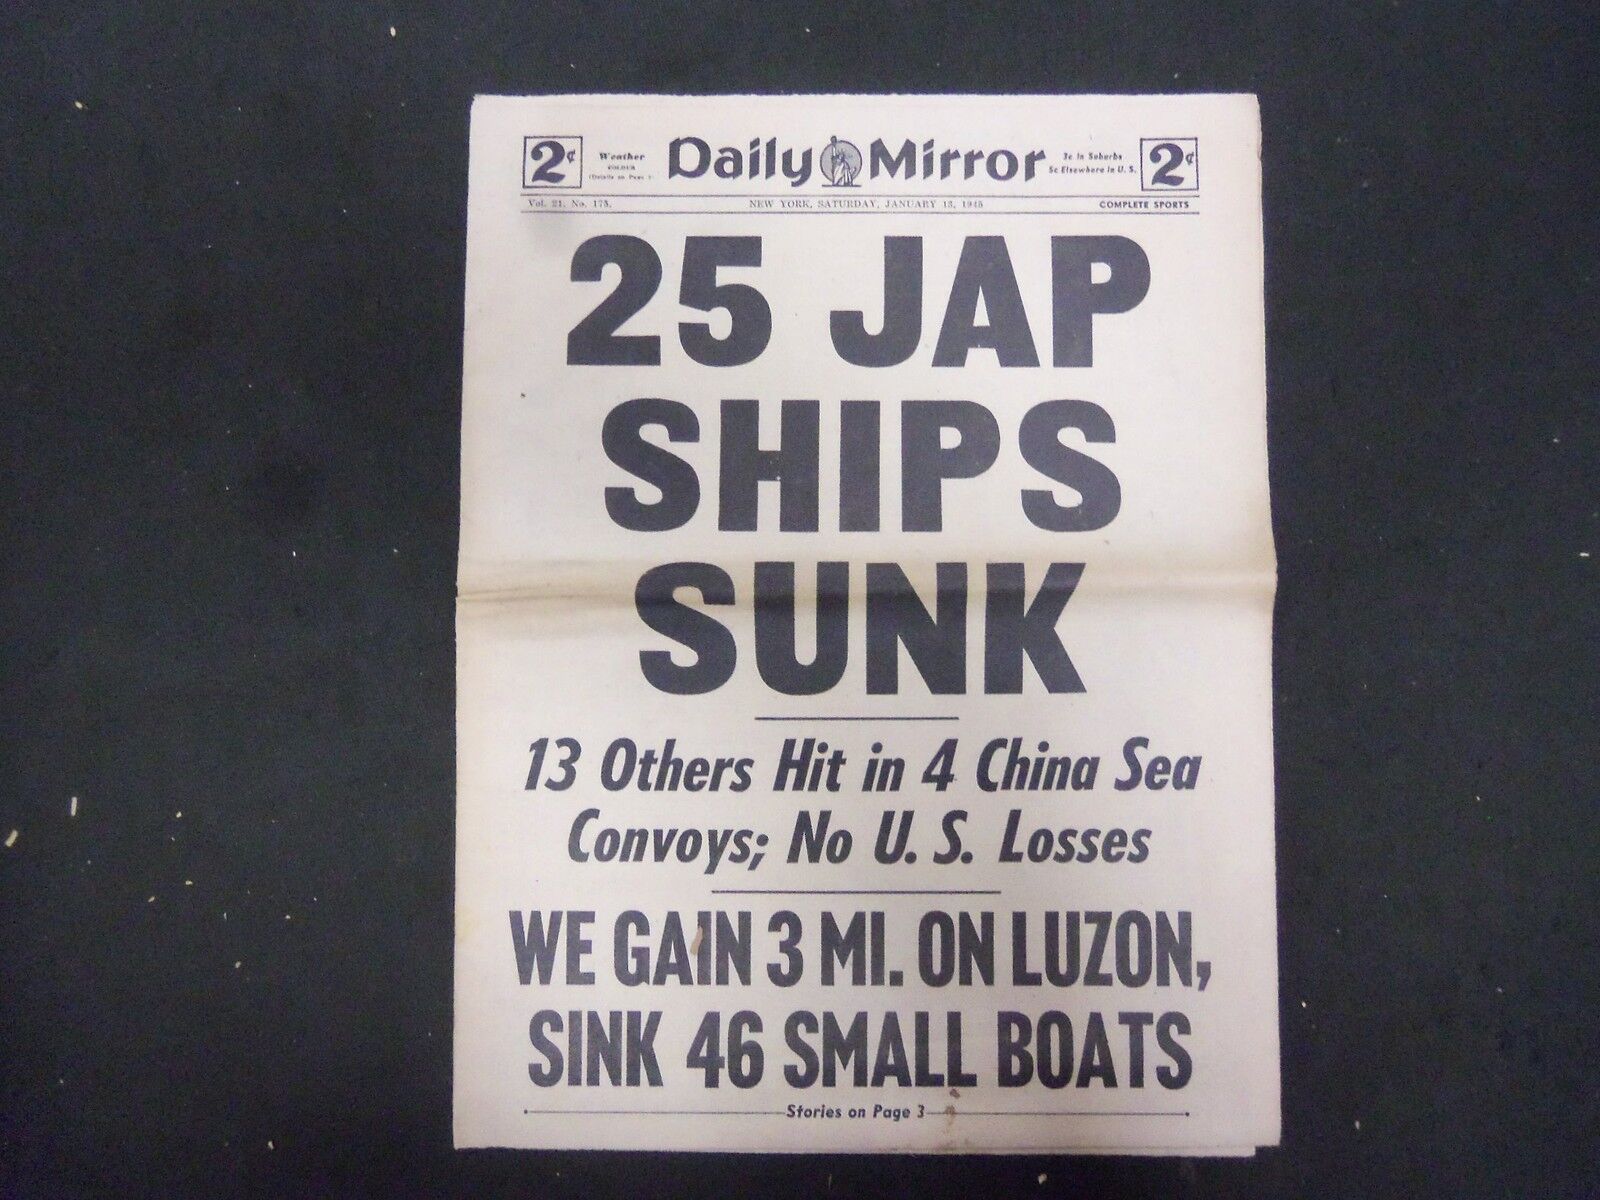 1945 JANUARY 13 NEW YORK DAILY MIRROR - 25 JAP SHIPS SUNK - NP 2221